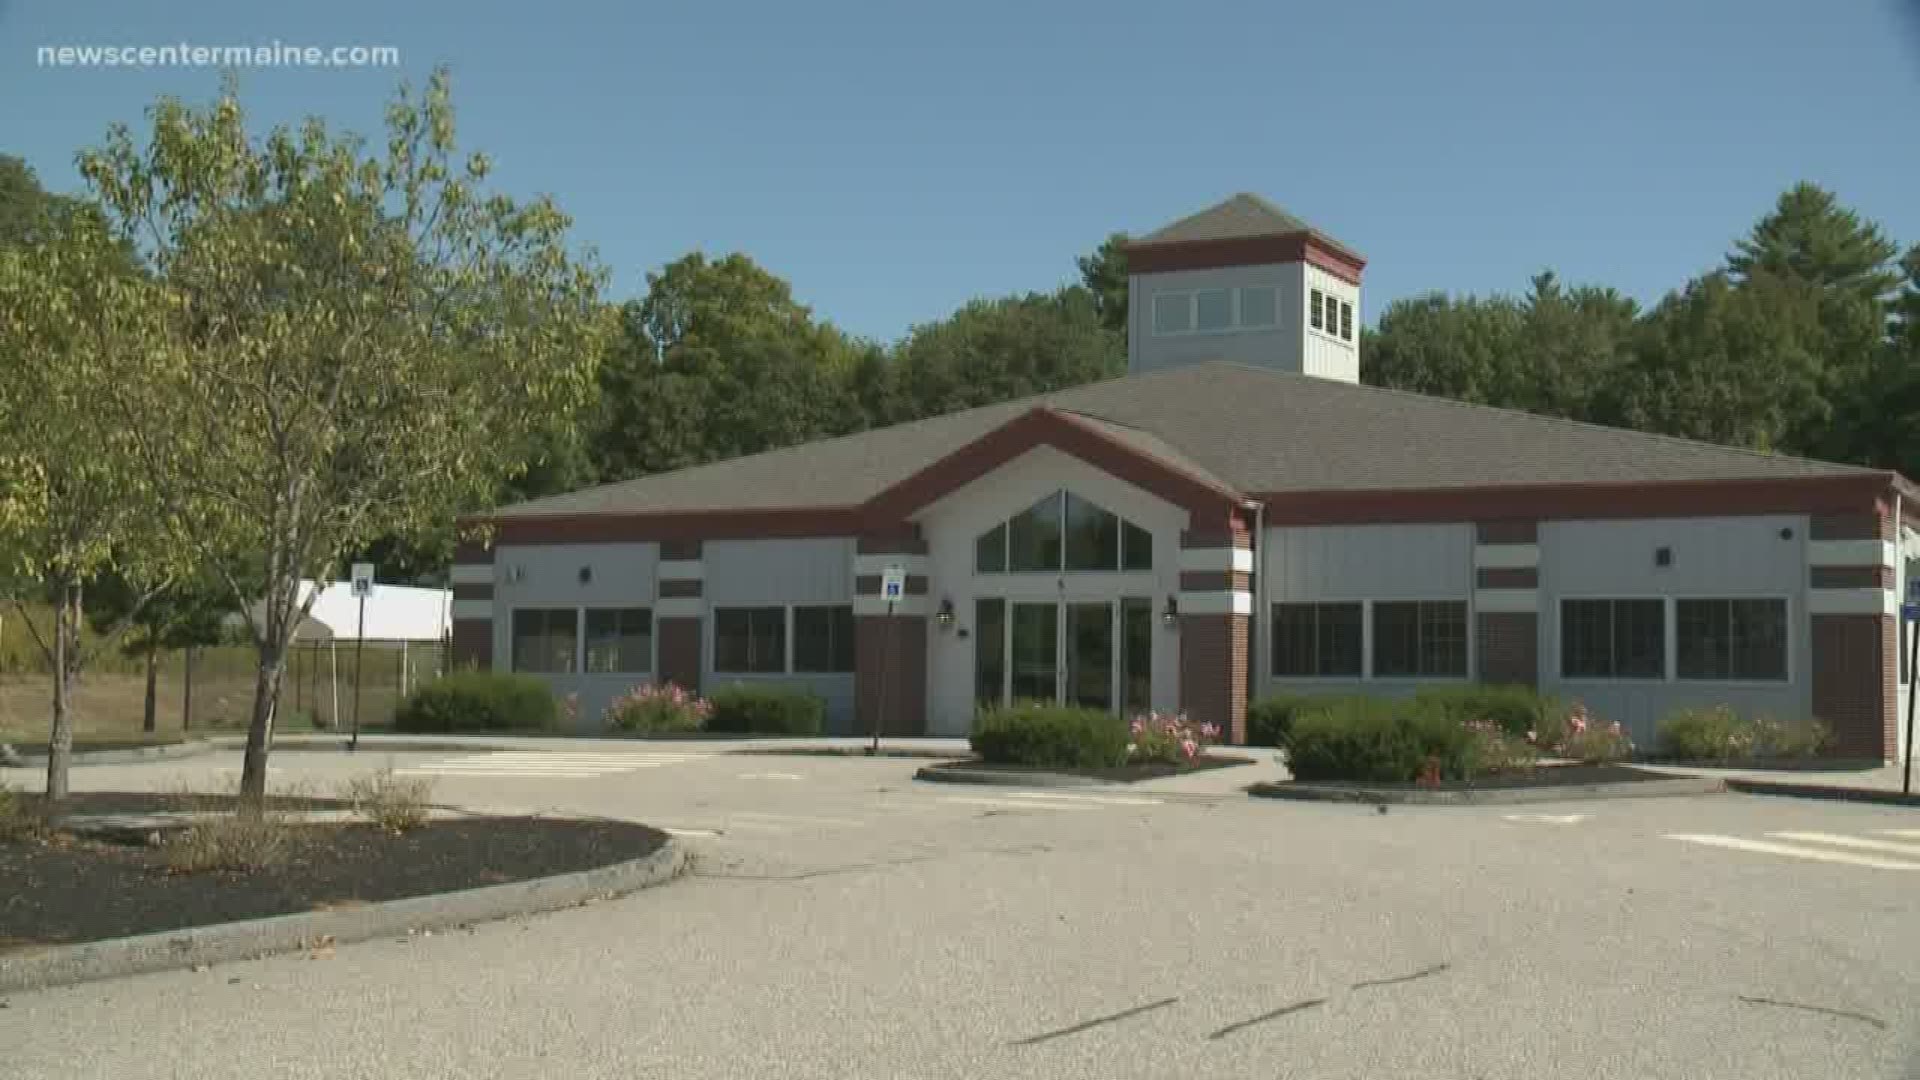 Saco daycare building issues.